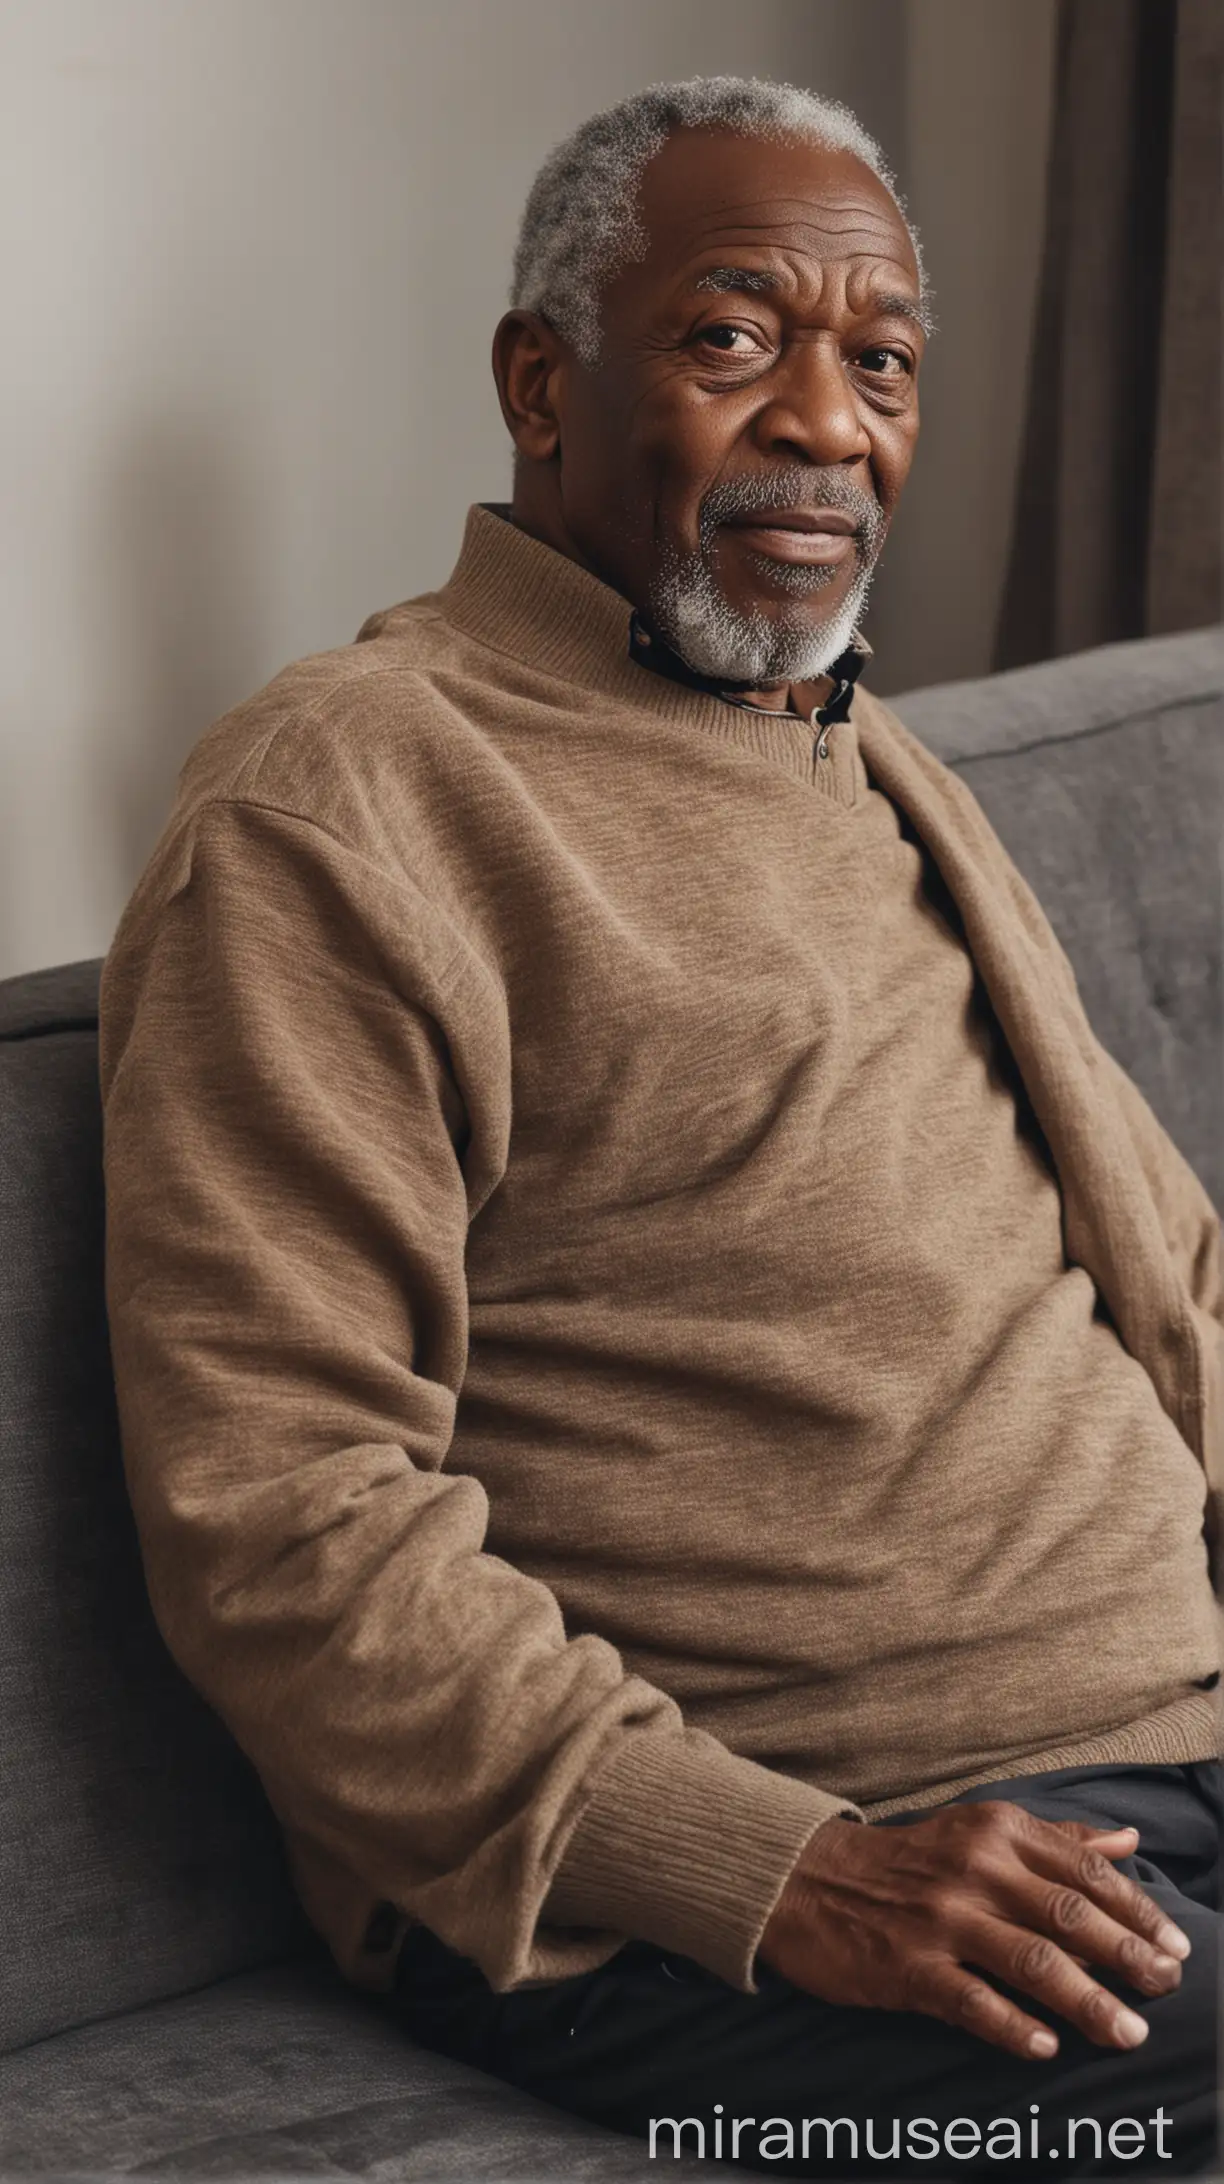 Elderly African American Man Relaxing on Couch